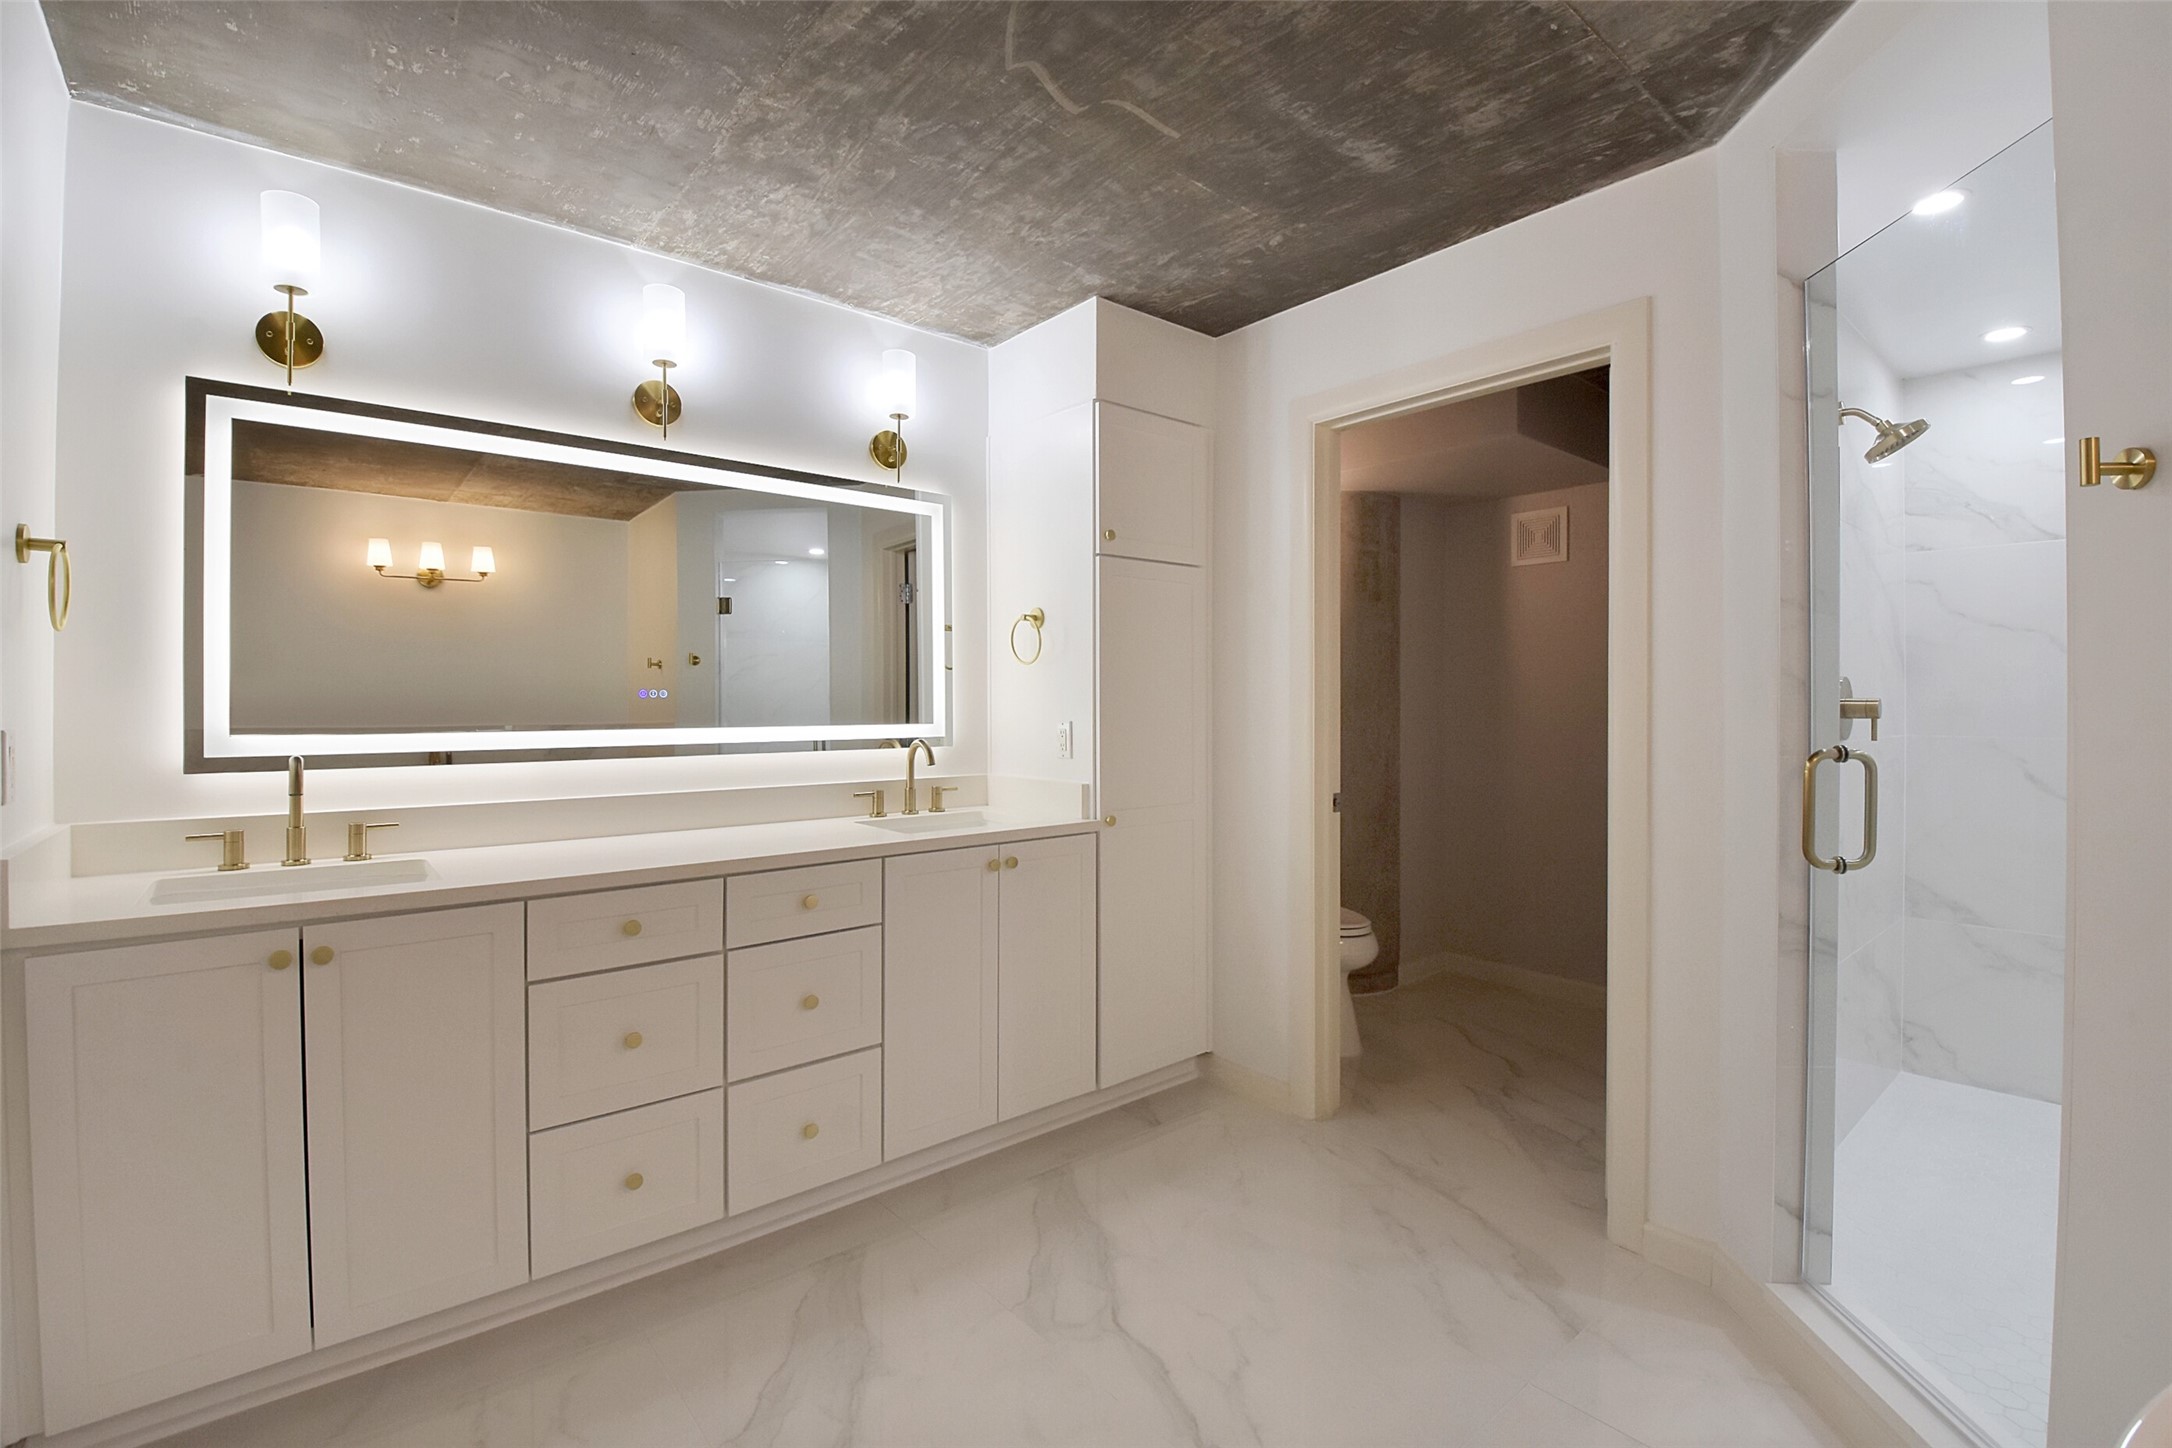 BEAUTIFULLY APPOINTED AND REMODELED ENSUITE PRIMARY BATHROOM FEATURES QUARTZ COUNTER, DUAL SINKS, CHIC LIGHTING AND AMPLE CABINETRY. NOTICE THE LARGE WALK-IN SHOWER TO THE RIGHT.